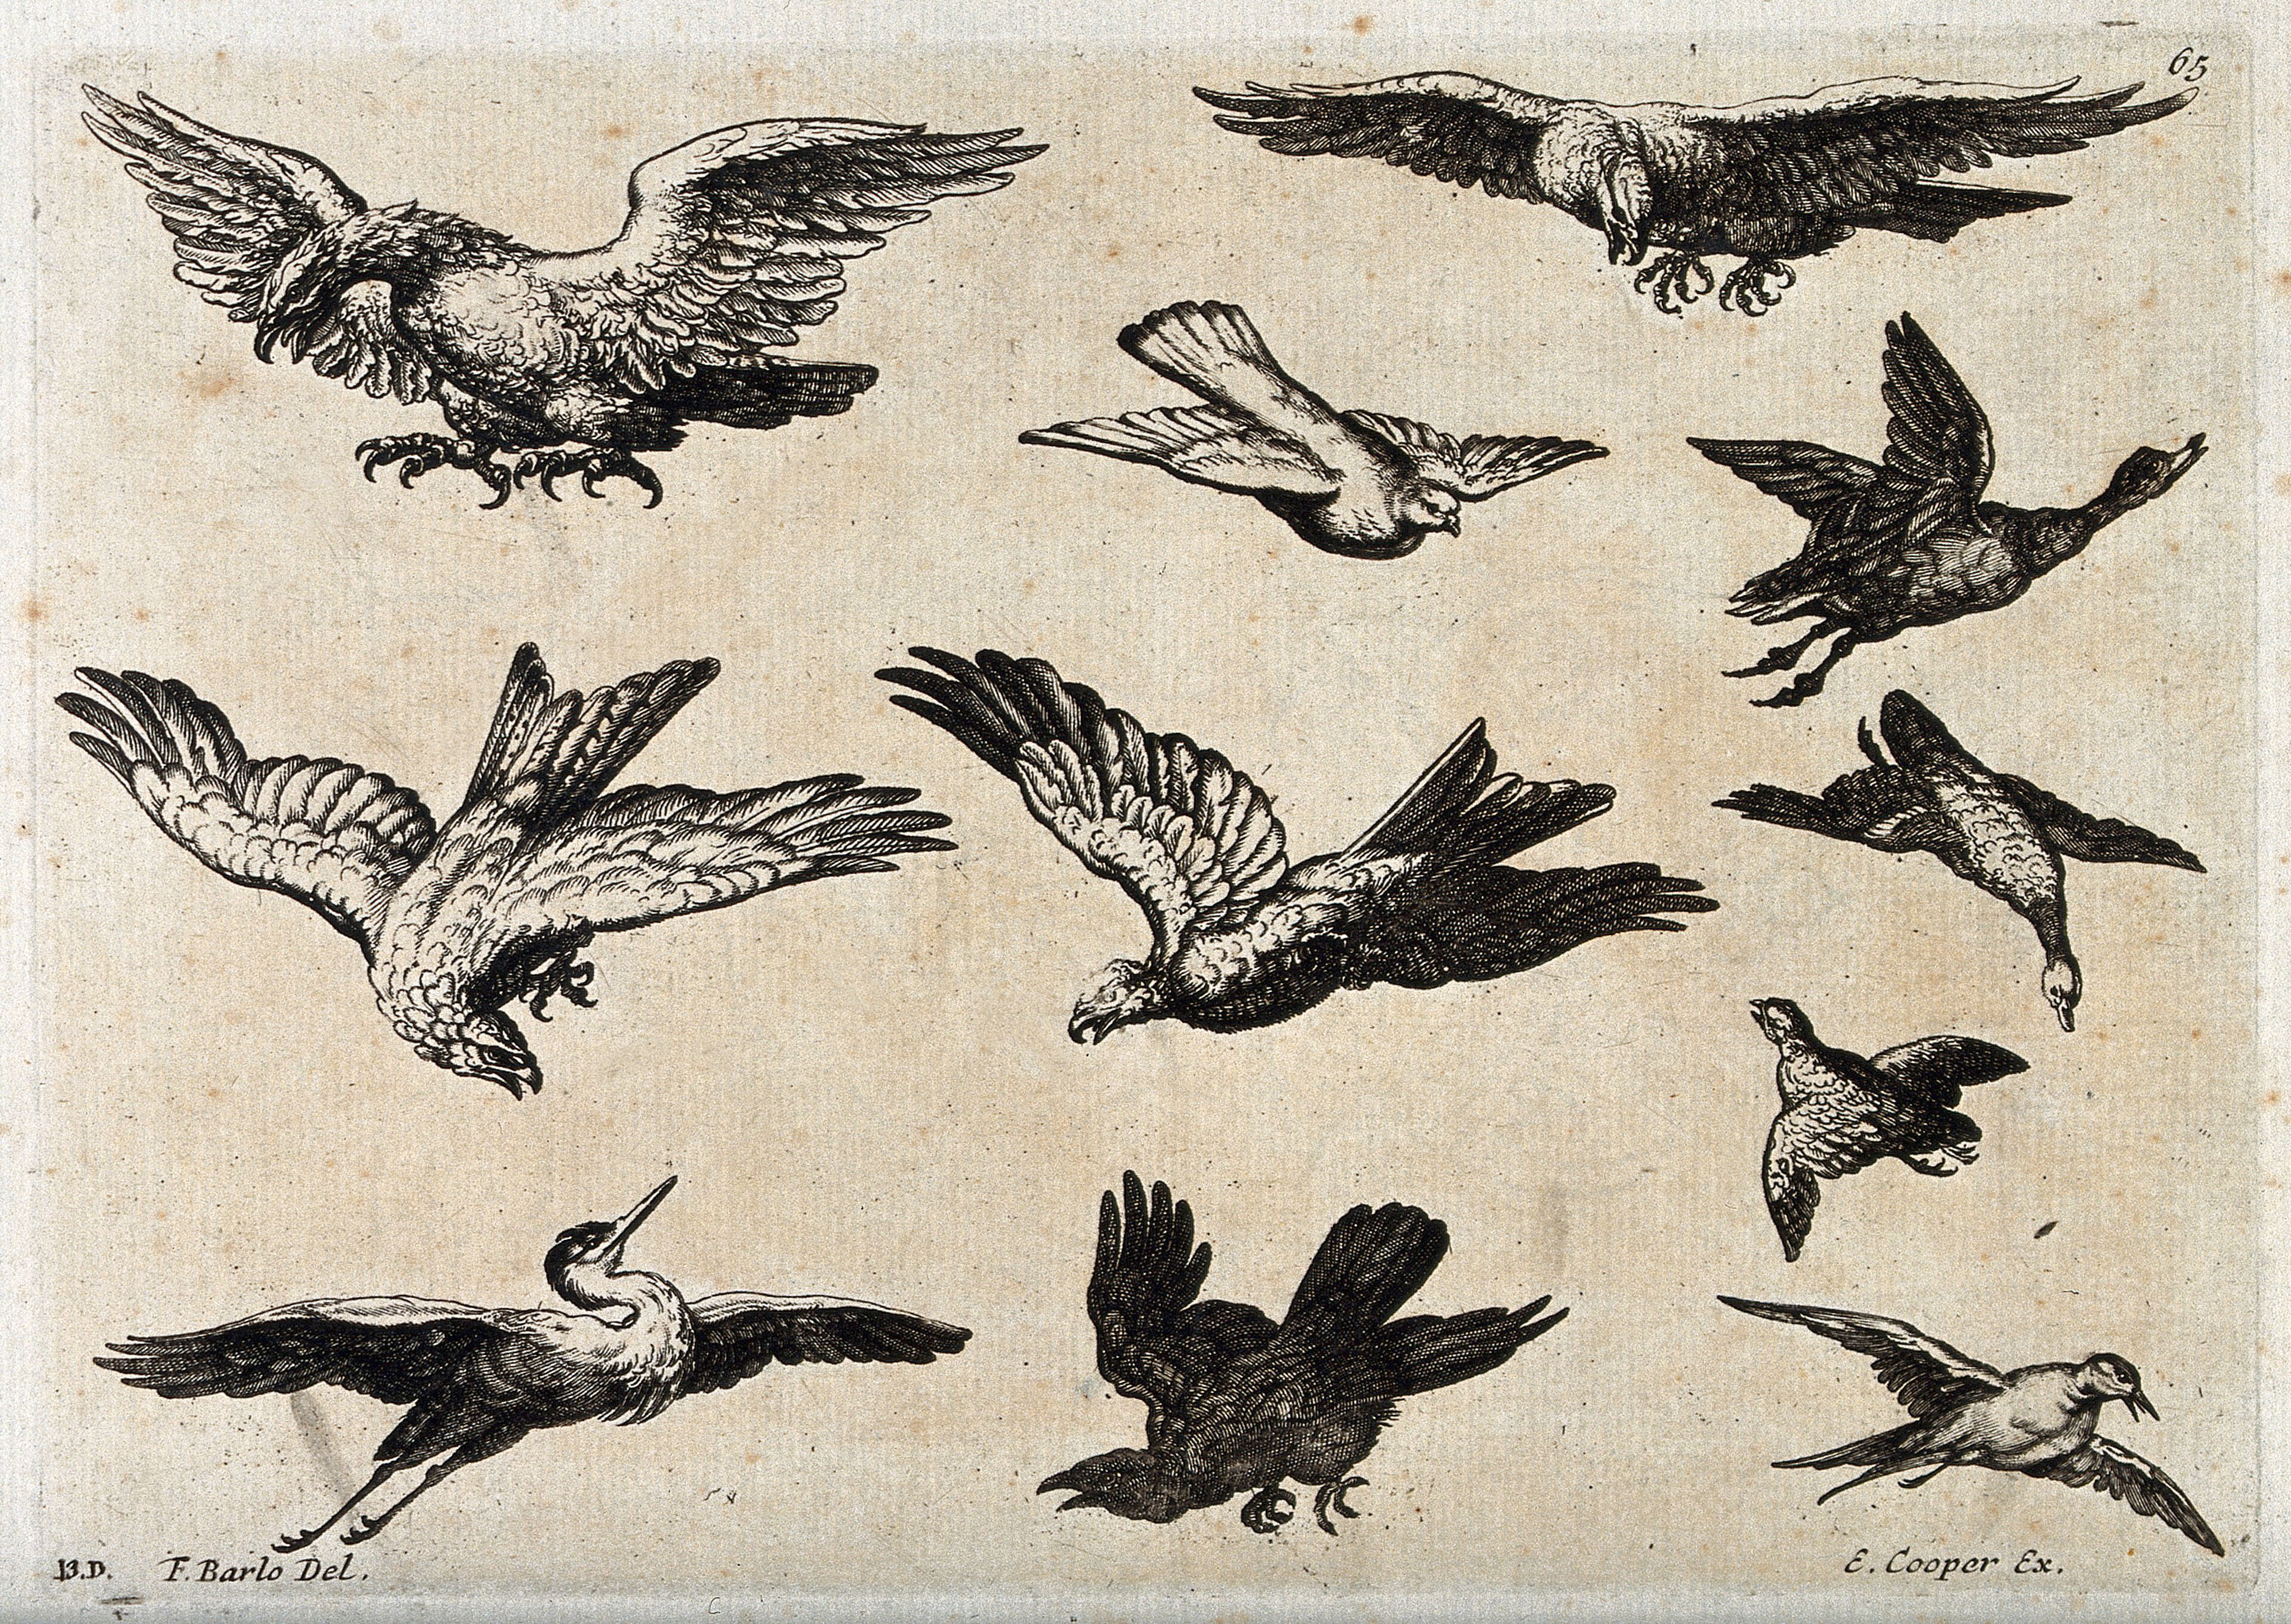 Various birds in flight, including eagles, a heron, a pigeon and ducks. Etching after F. Barlow.